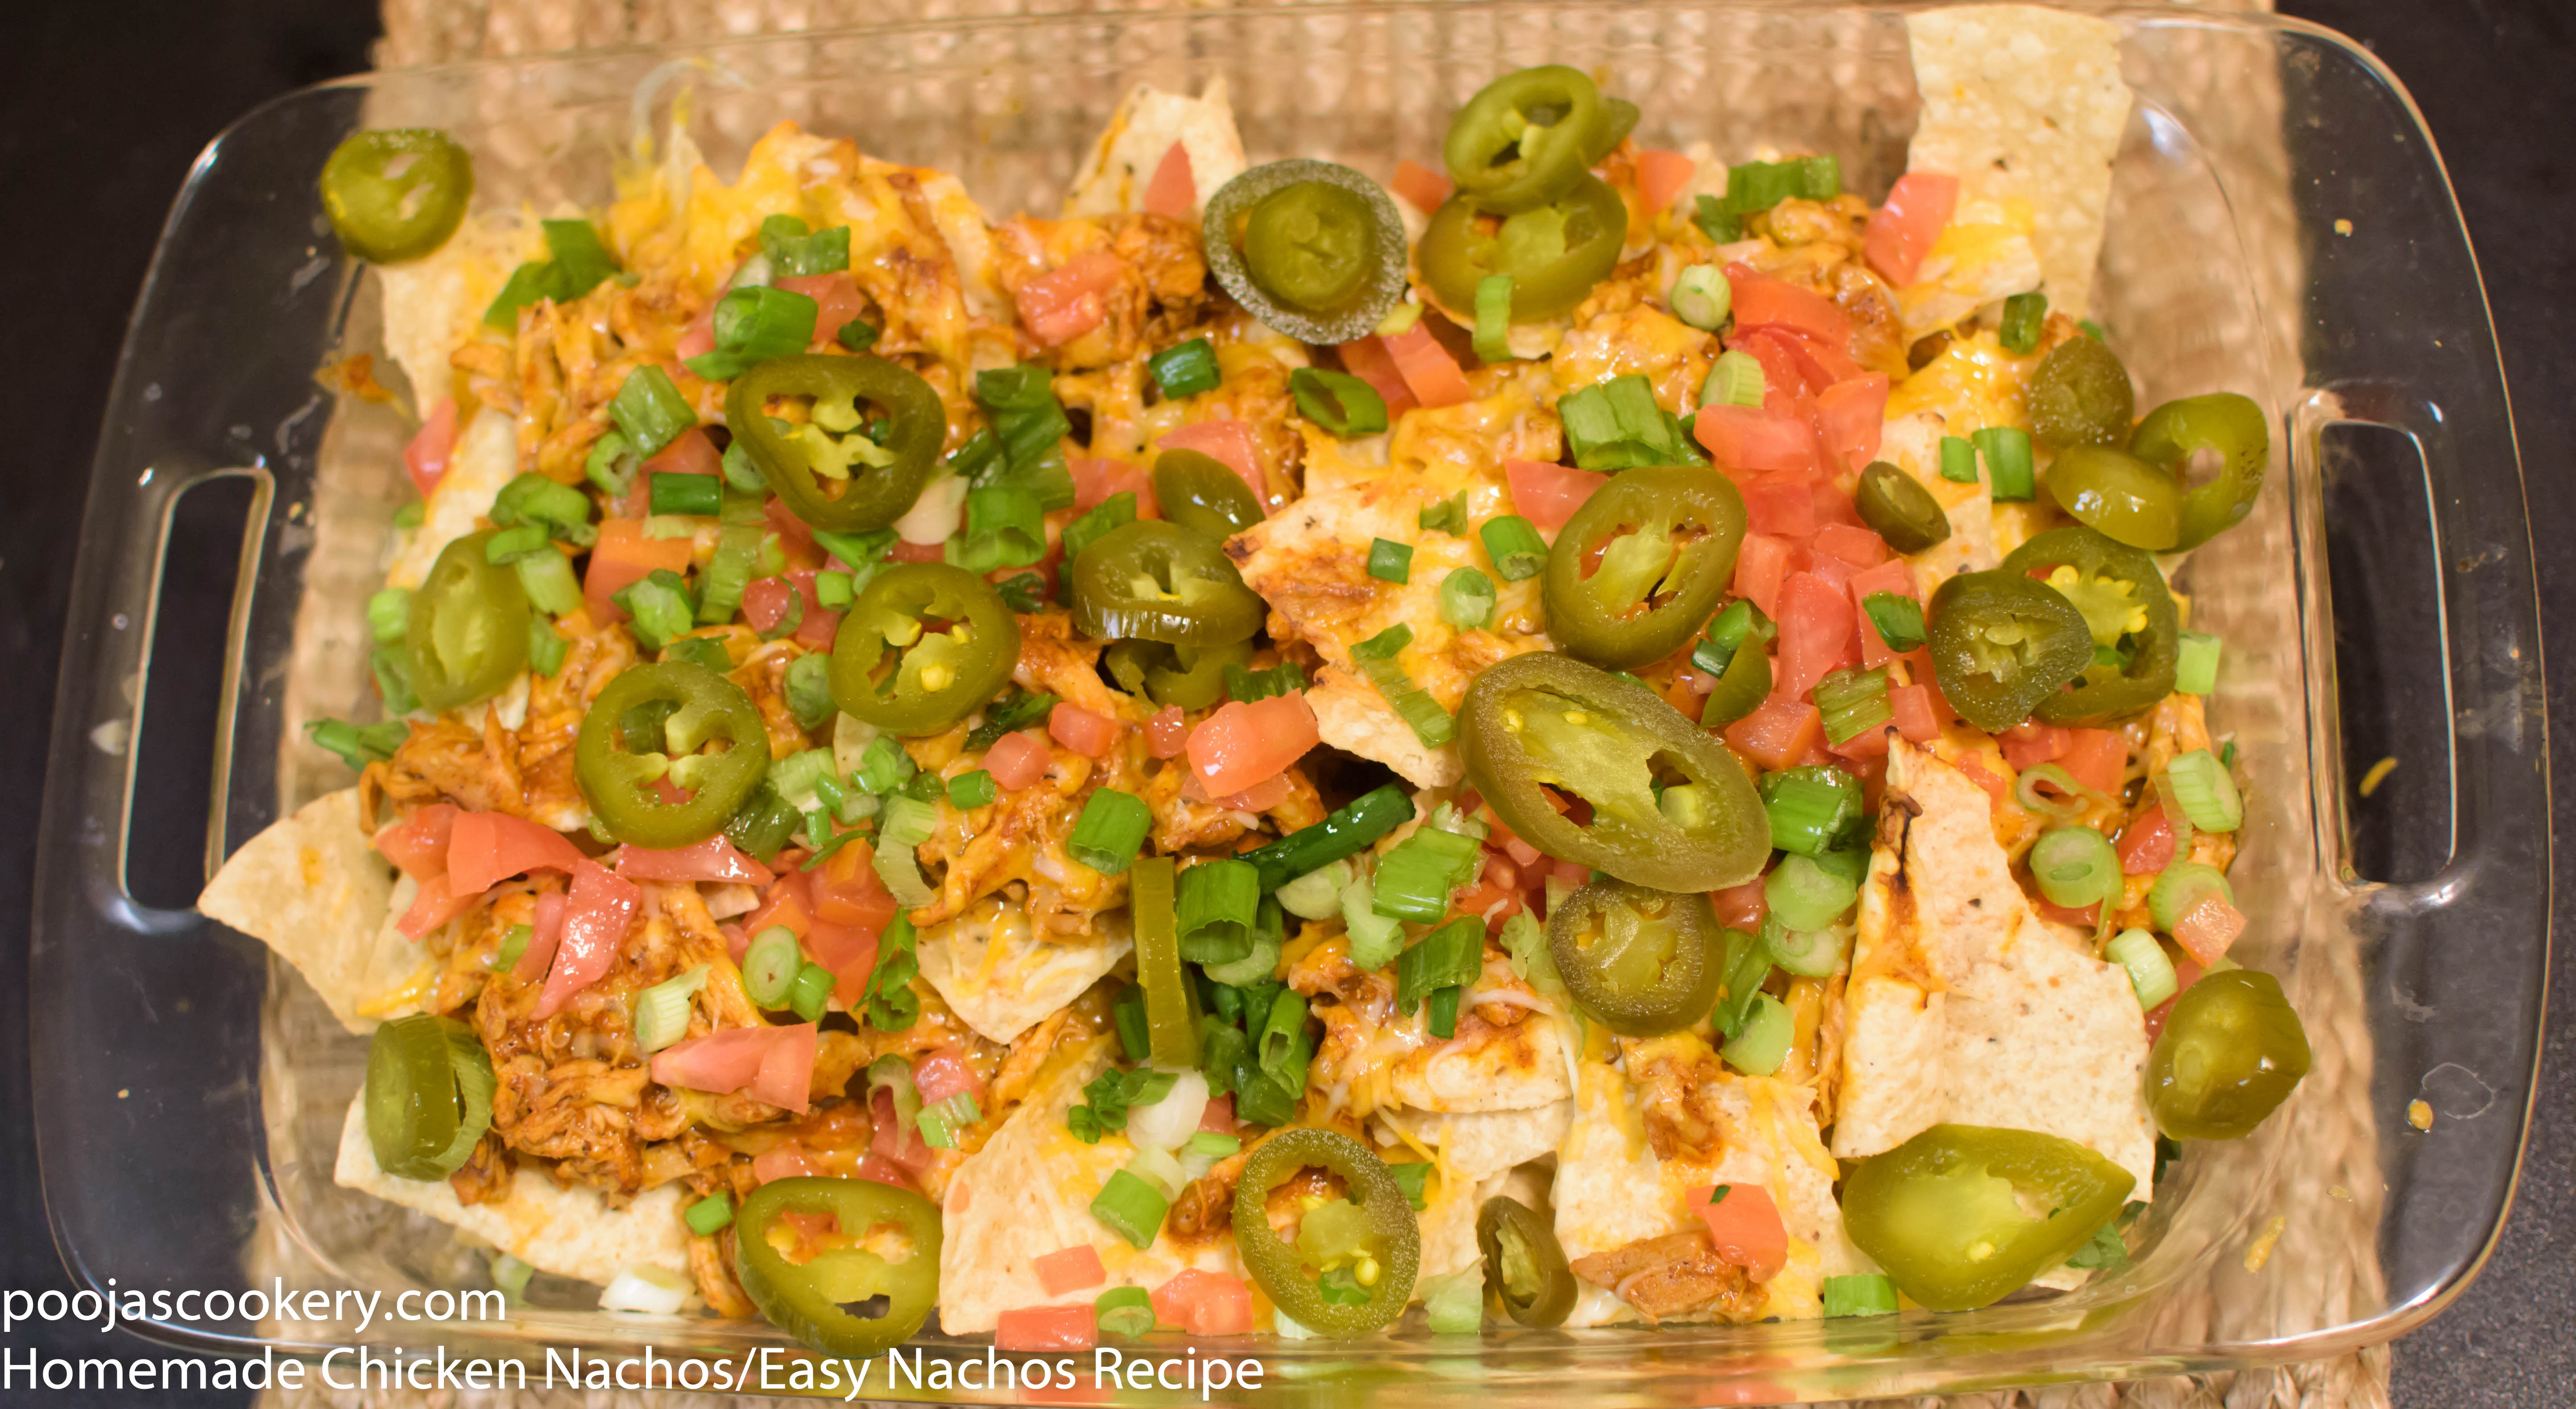 Baked Nachos are garnished with tomatoes and Jalepanos